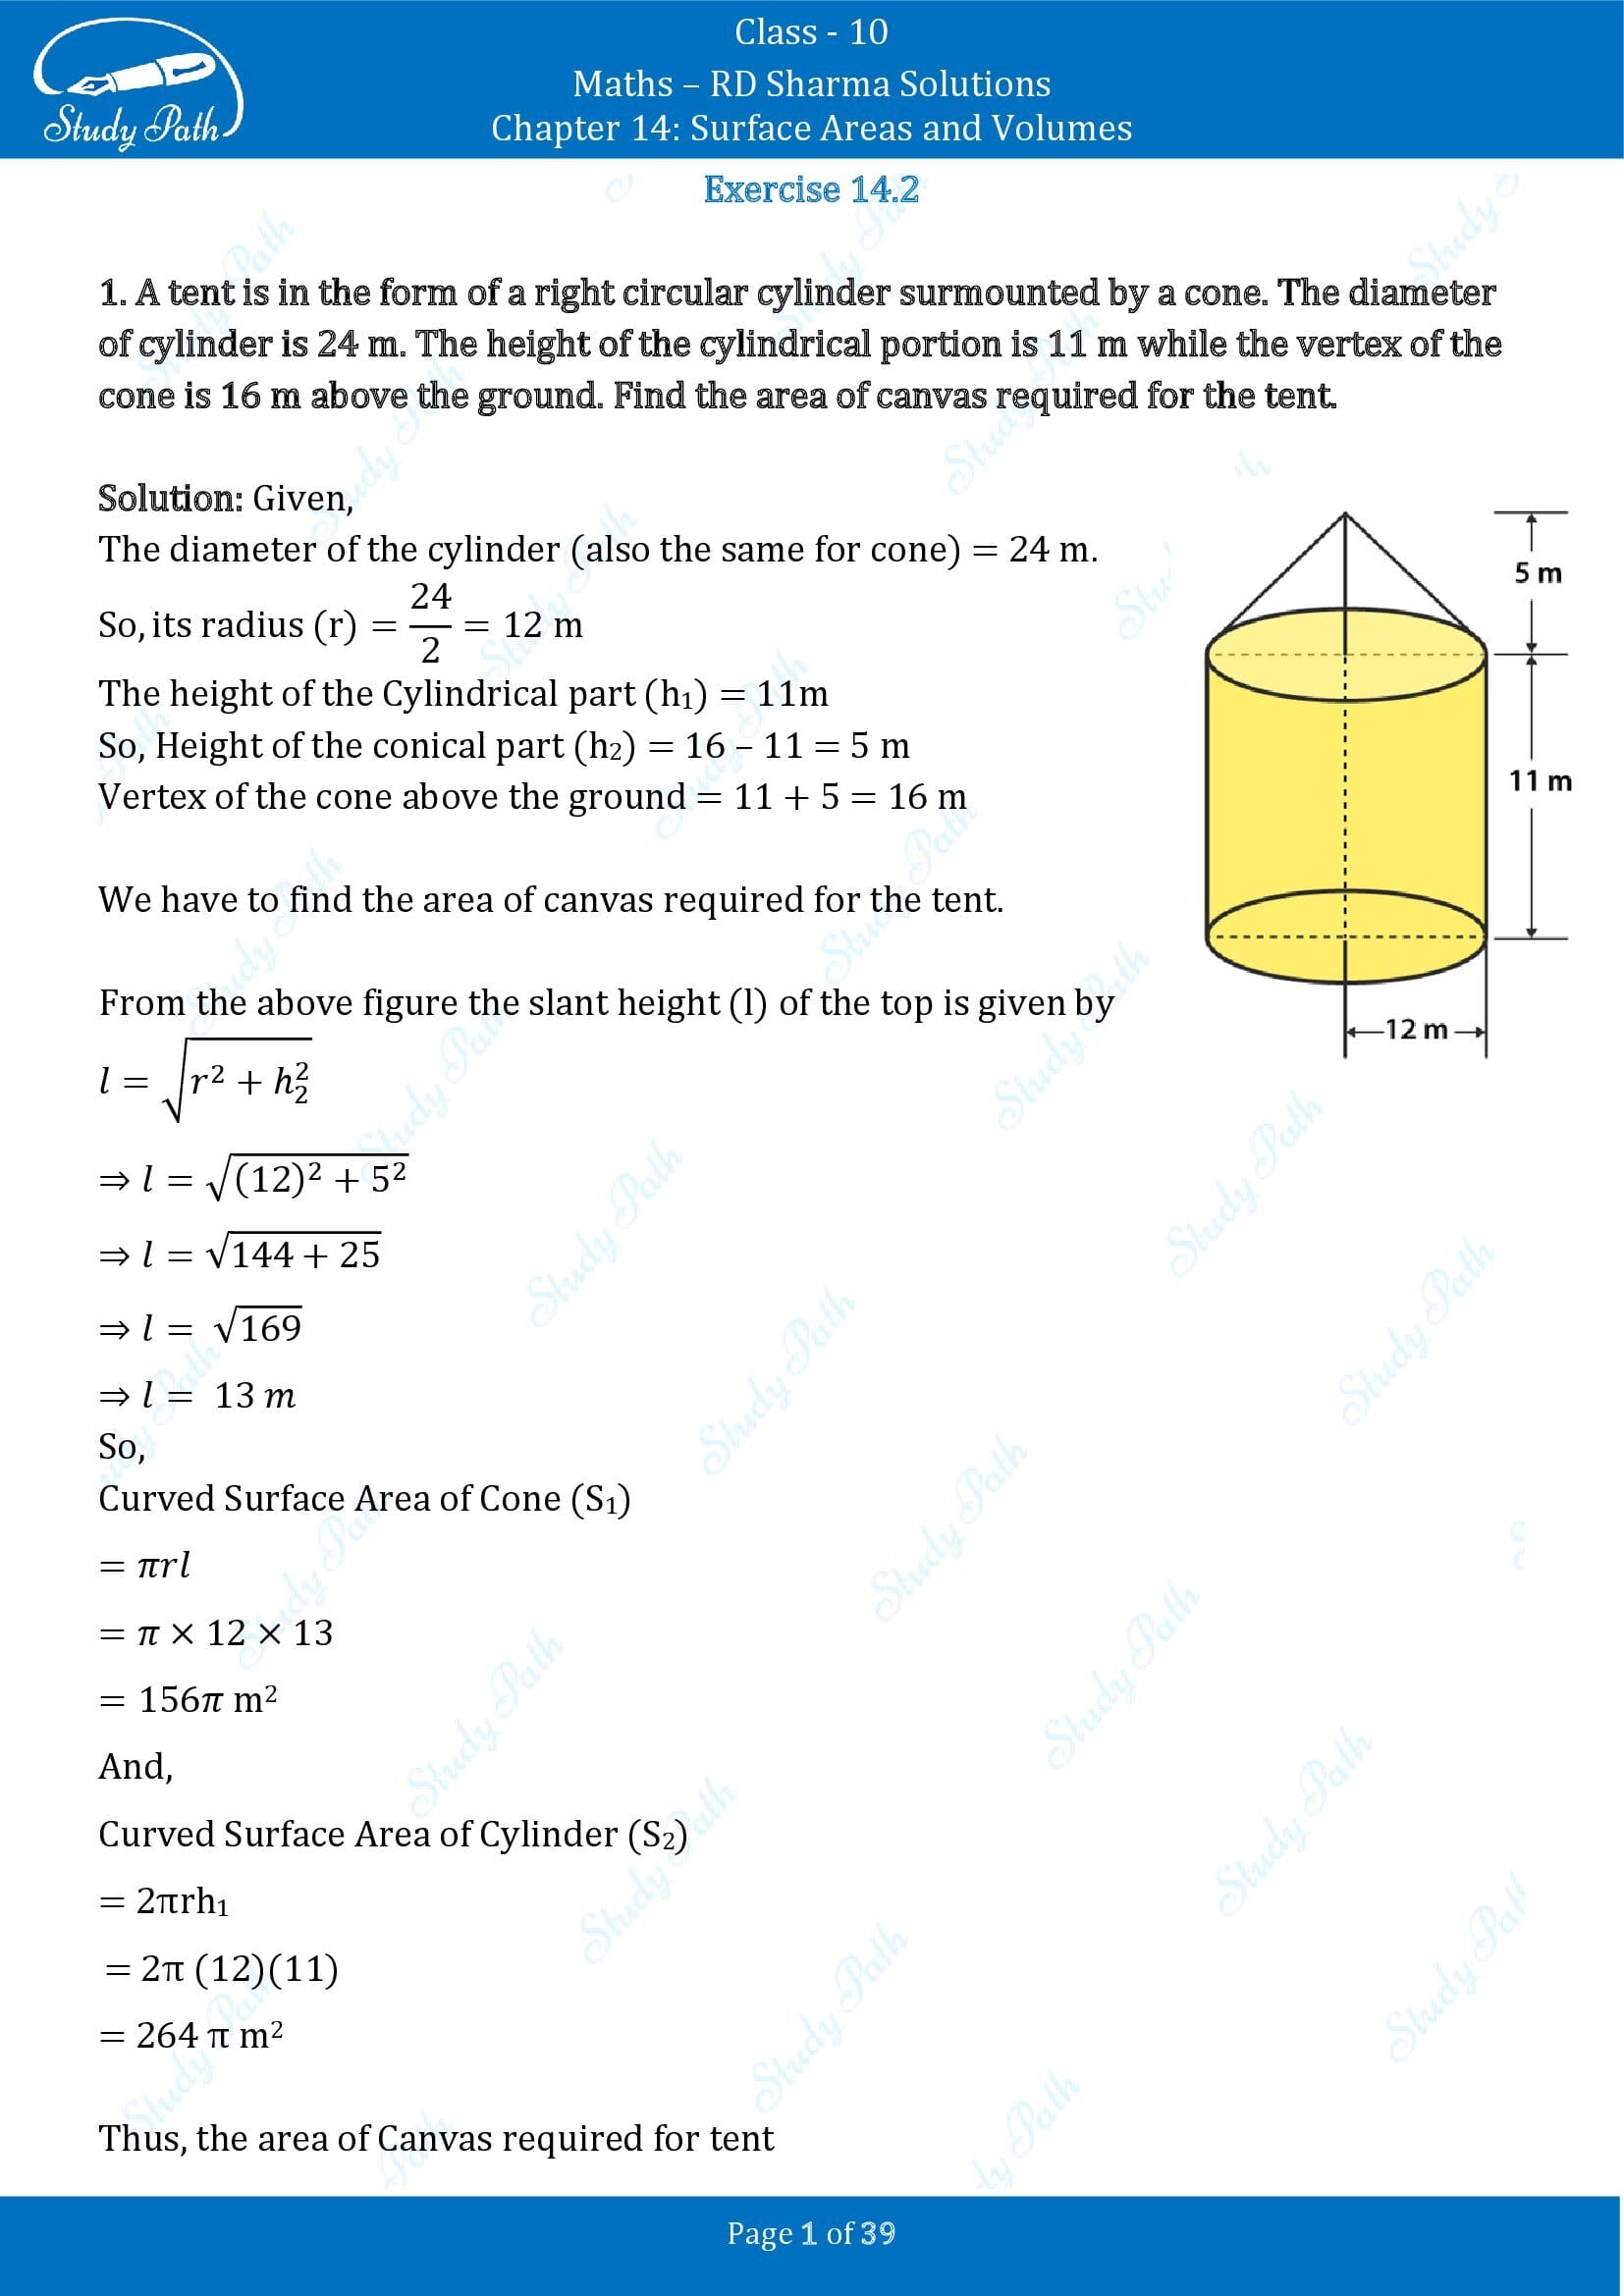 RD Sharma Solutions Class 10 Chapter 14 Surface Areas and Volumes Exercise 14.2 00001